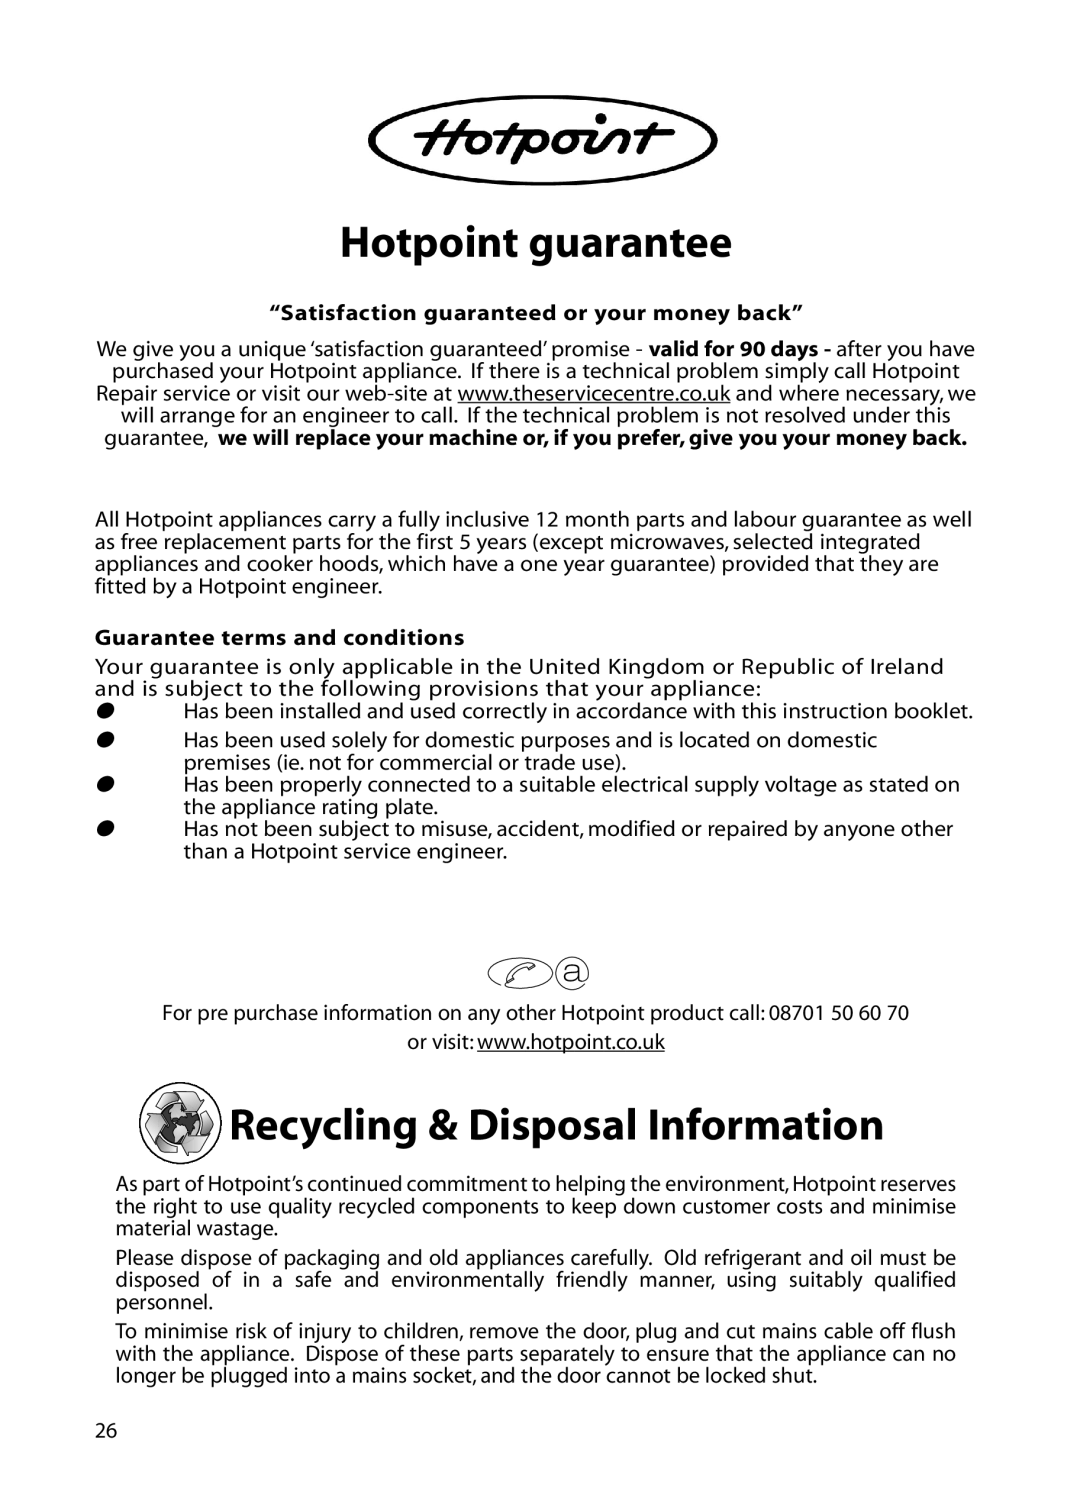 Hotpoint FFU00 manual Hotpoint guarantee, Recycling & Disposal Information, “Satisfaction guaranteed or your money back” 